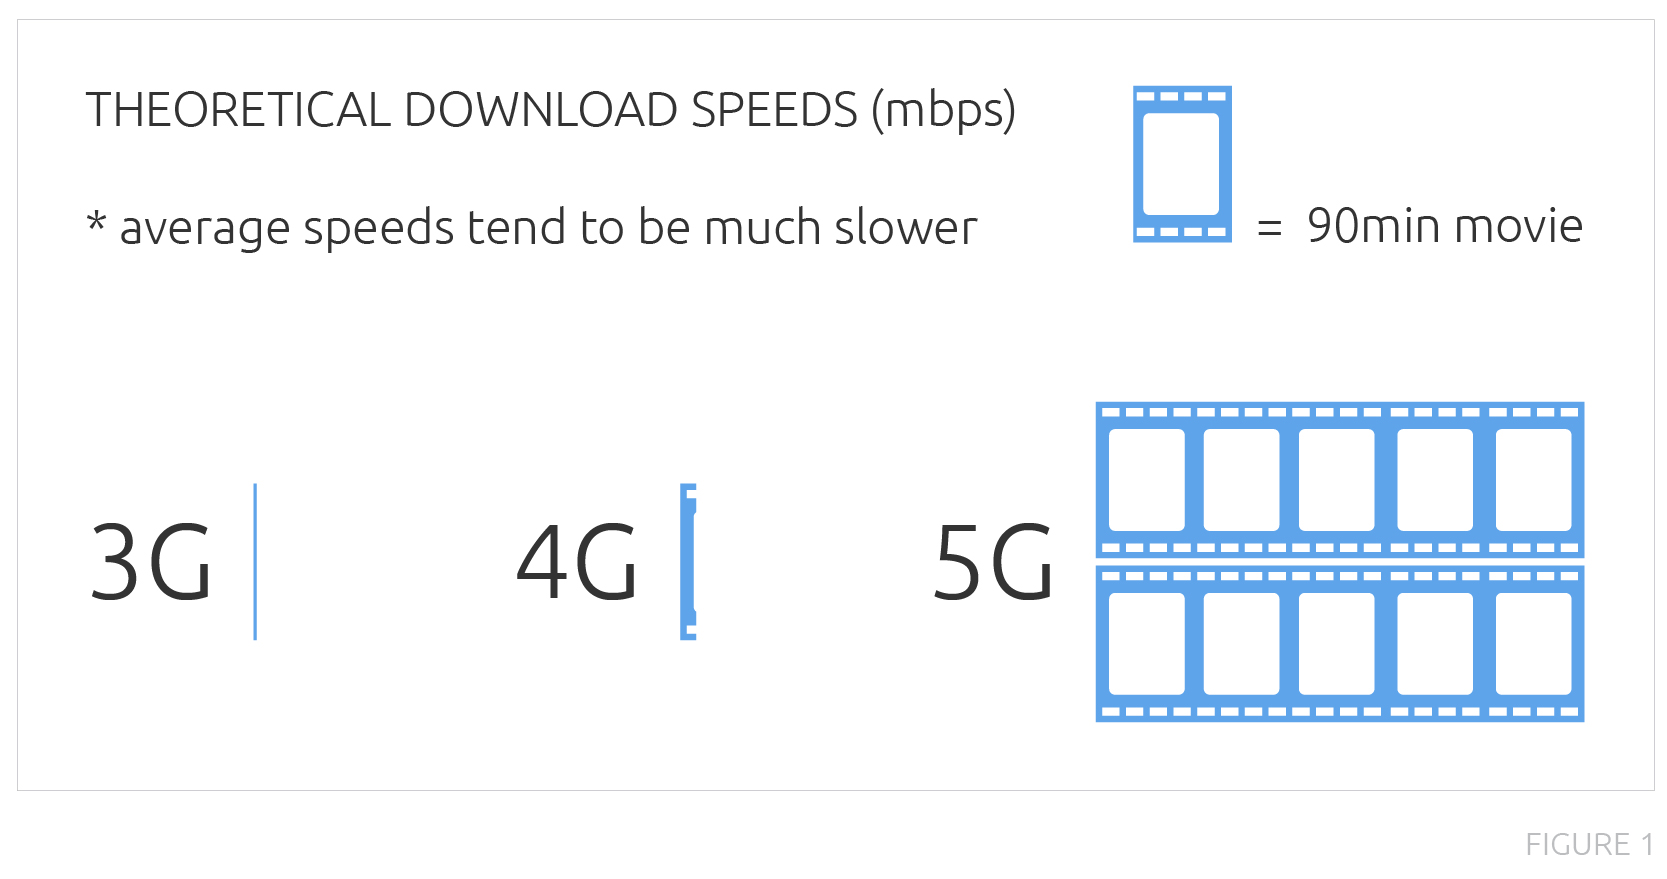 Chart illustrating the theoretical download speeds